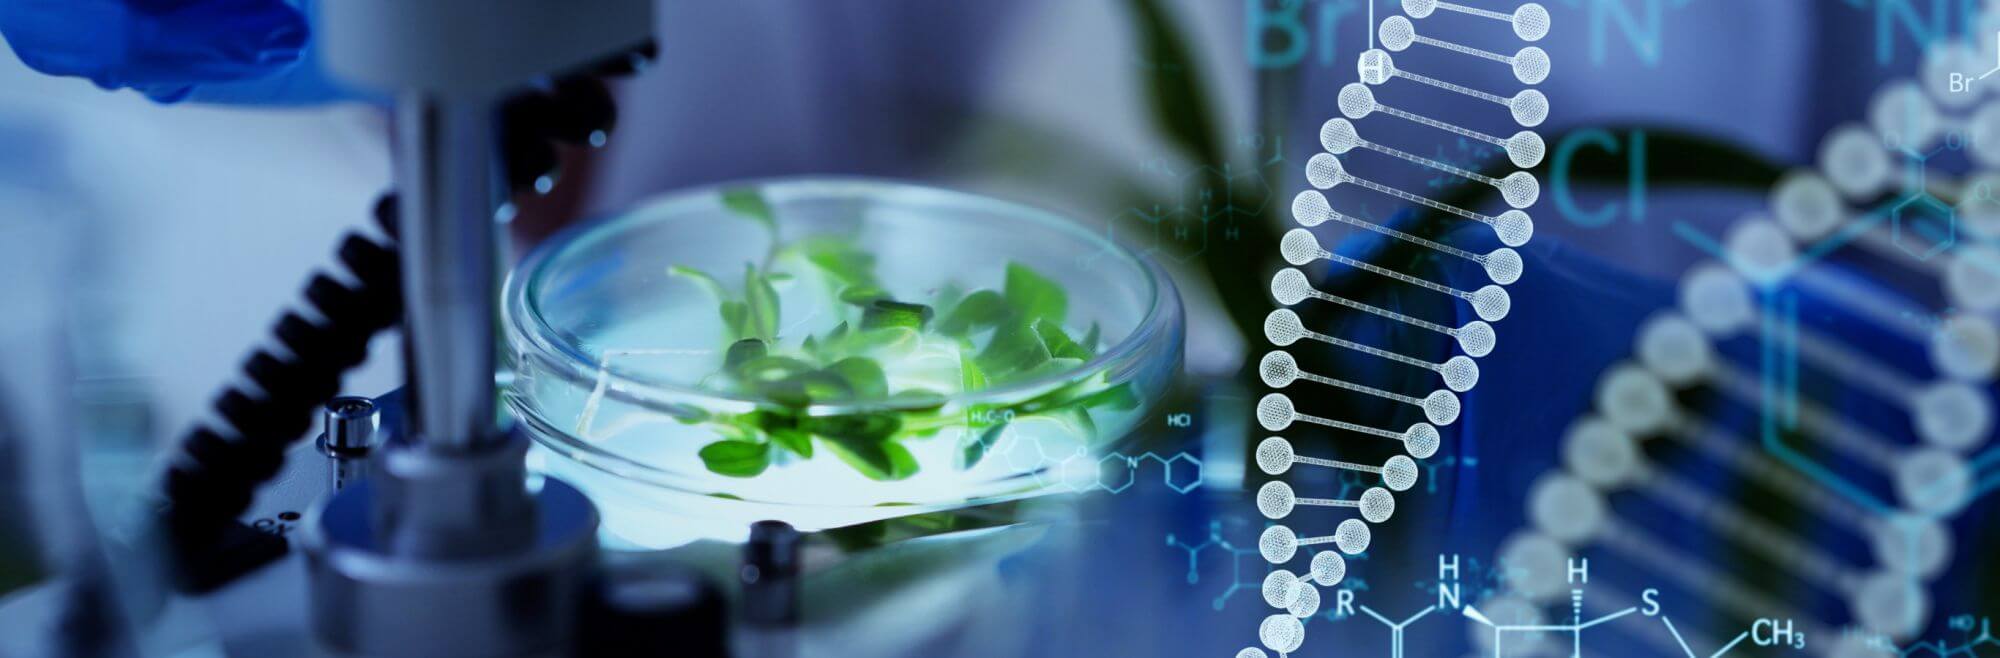 TESTING AND ANALYSIS OF BIOBASED PRODUCTS